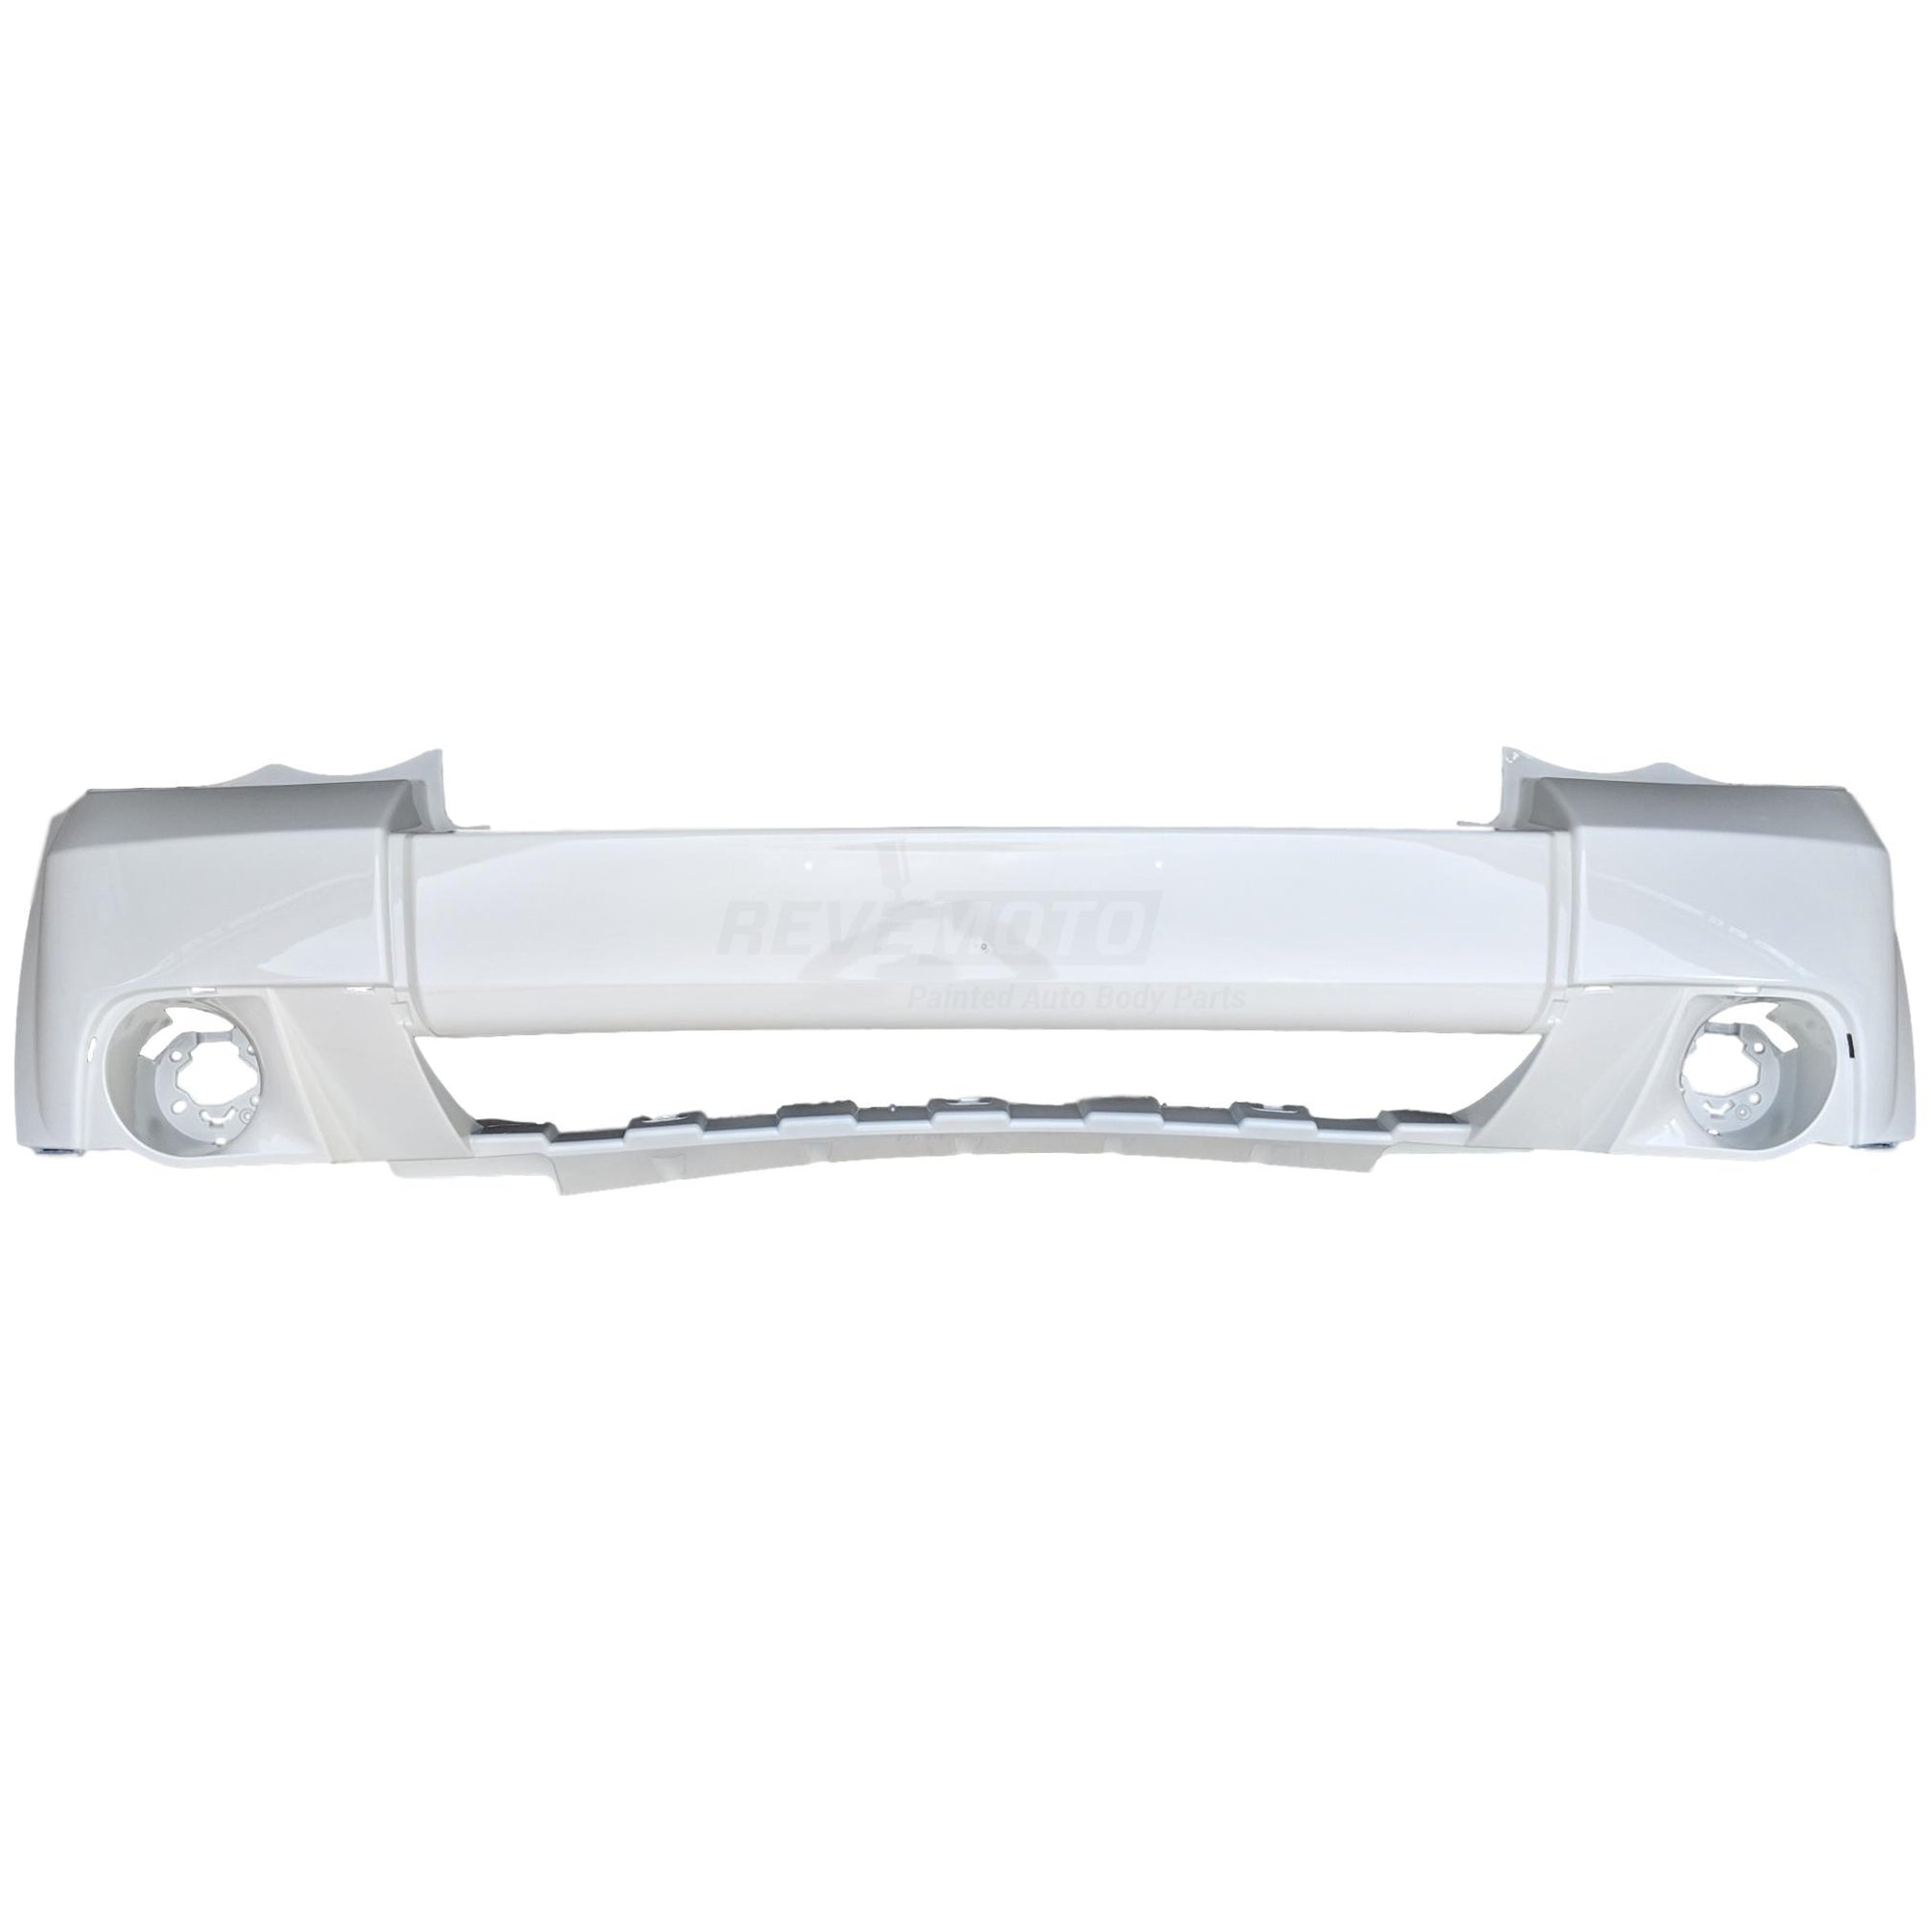 2010 Jeep Grand Cherokee Front Bumper, Laredo, Limited, Without Chrome Insert, Painted  Stone White (PW1) 68033744AB CH1000932